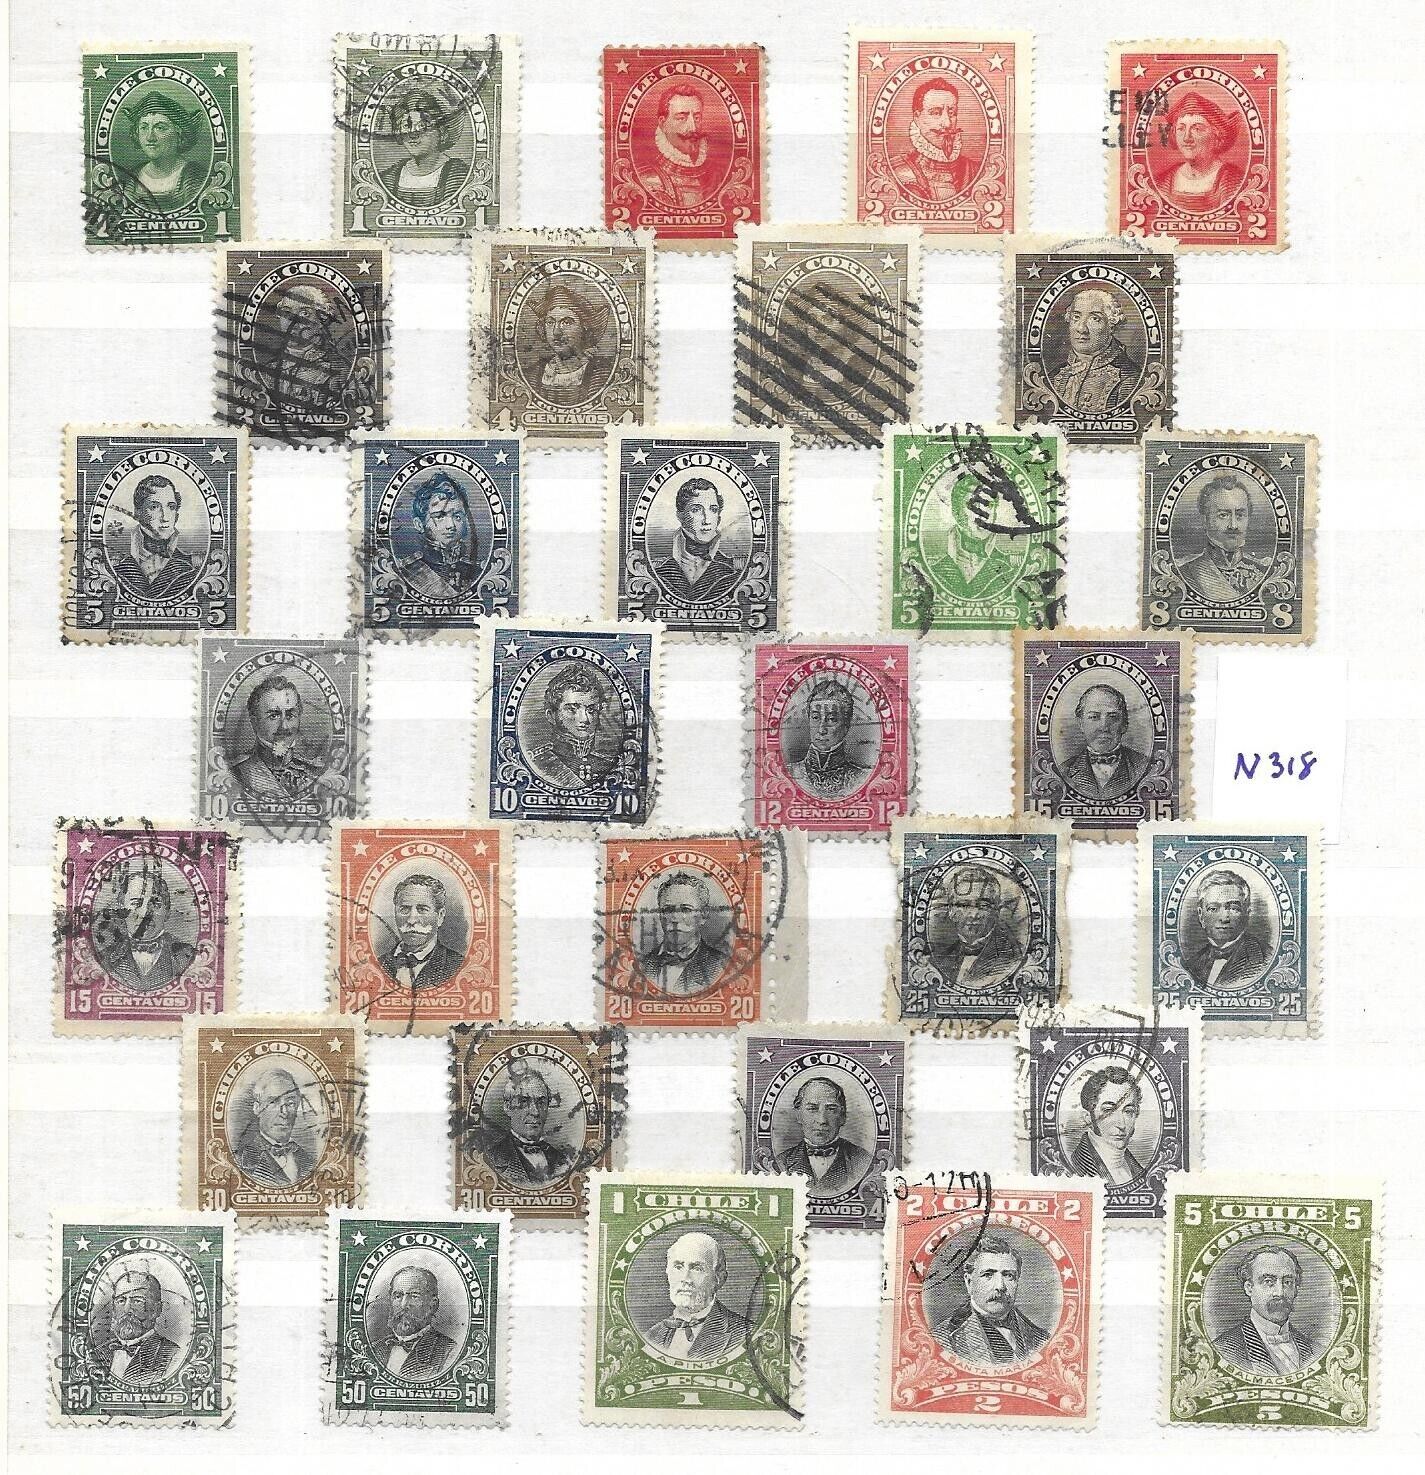 Chile Stamps (n318)